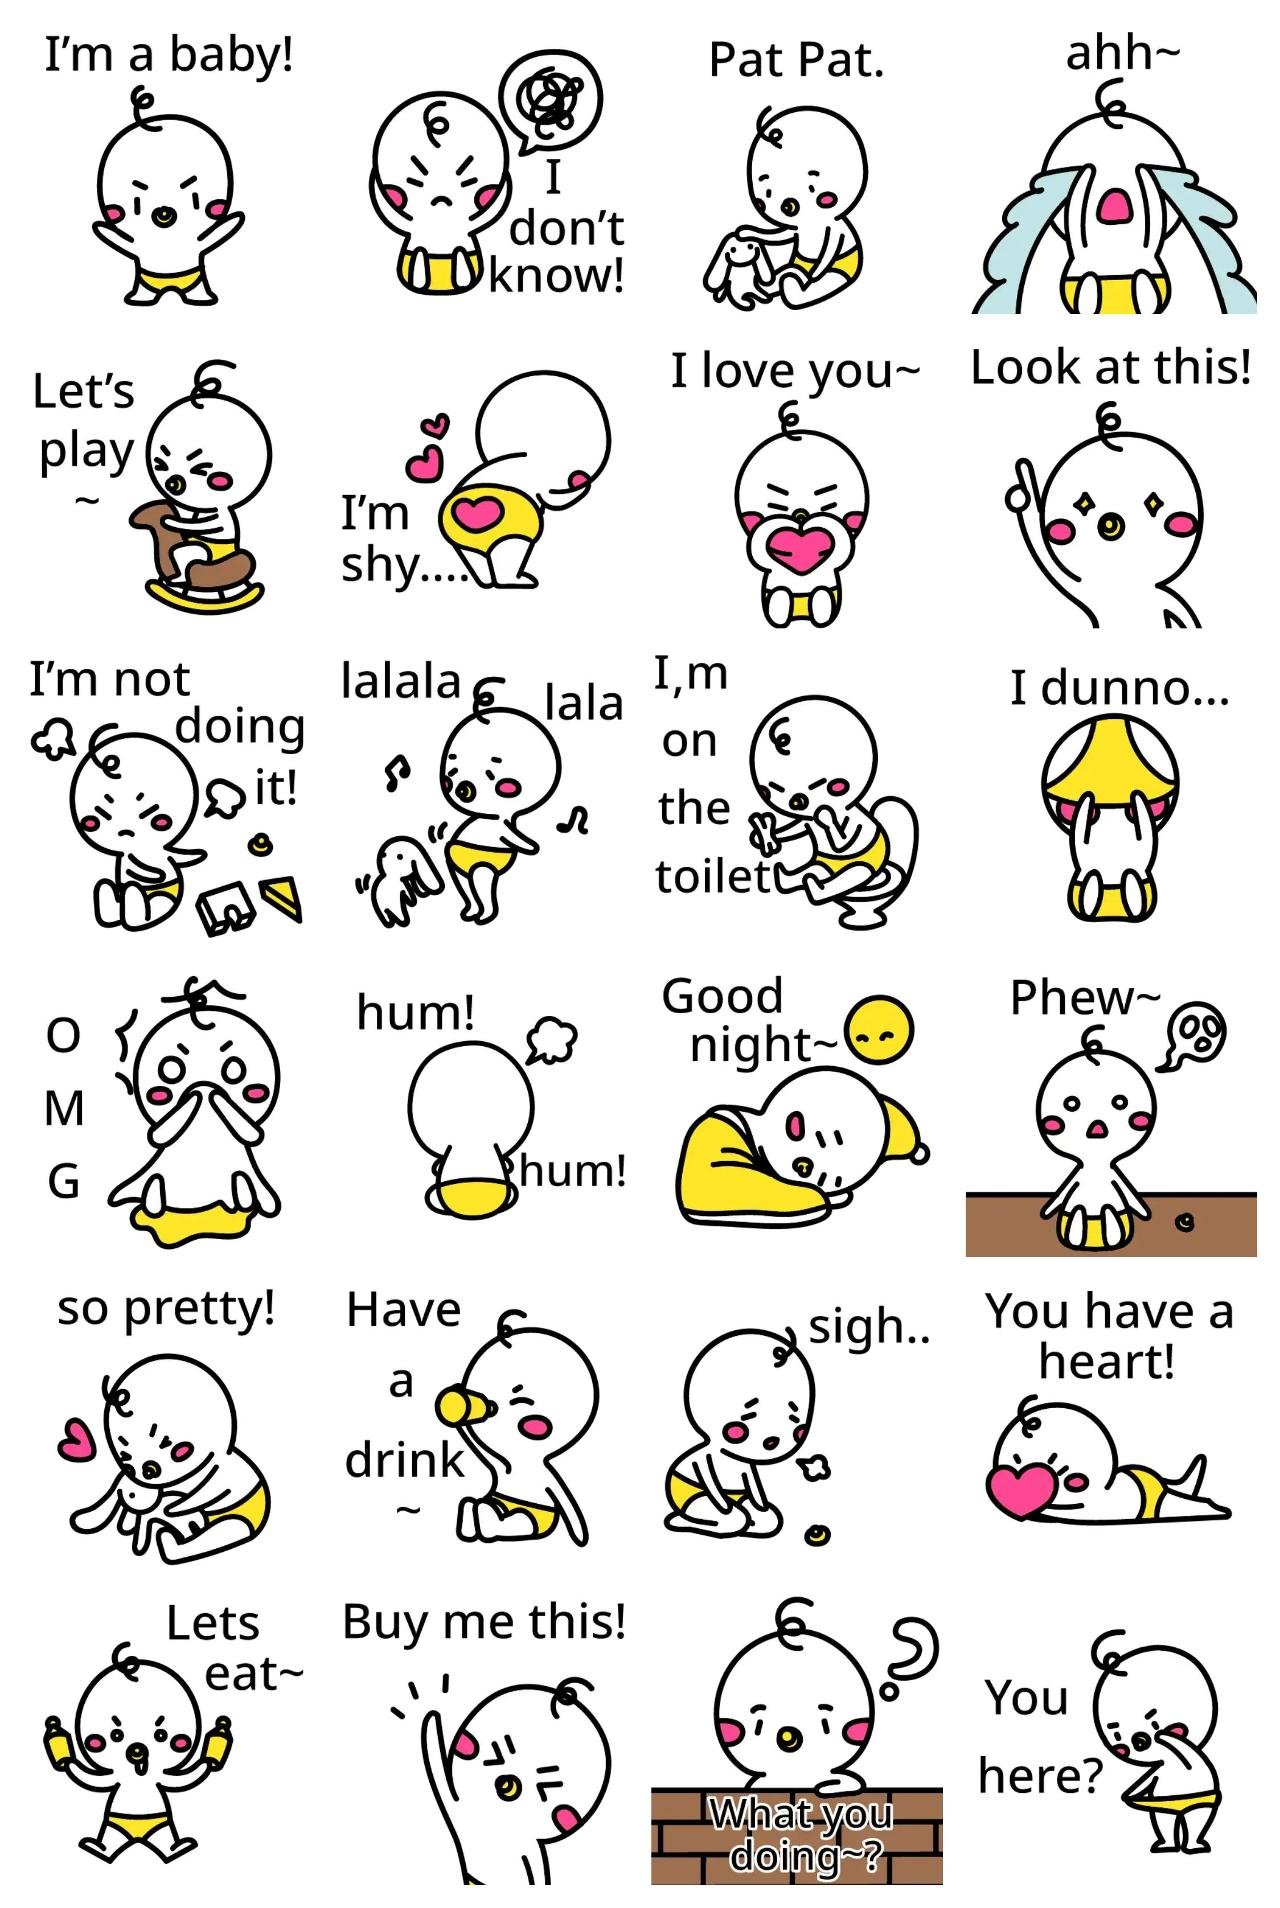 I'm a baby! Animation/Cartoon,People sticker pack for Whatsapp, Telegram, Signal, and others chatting and message apps